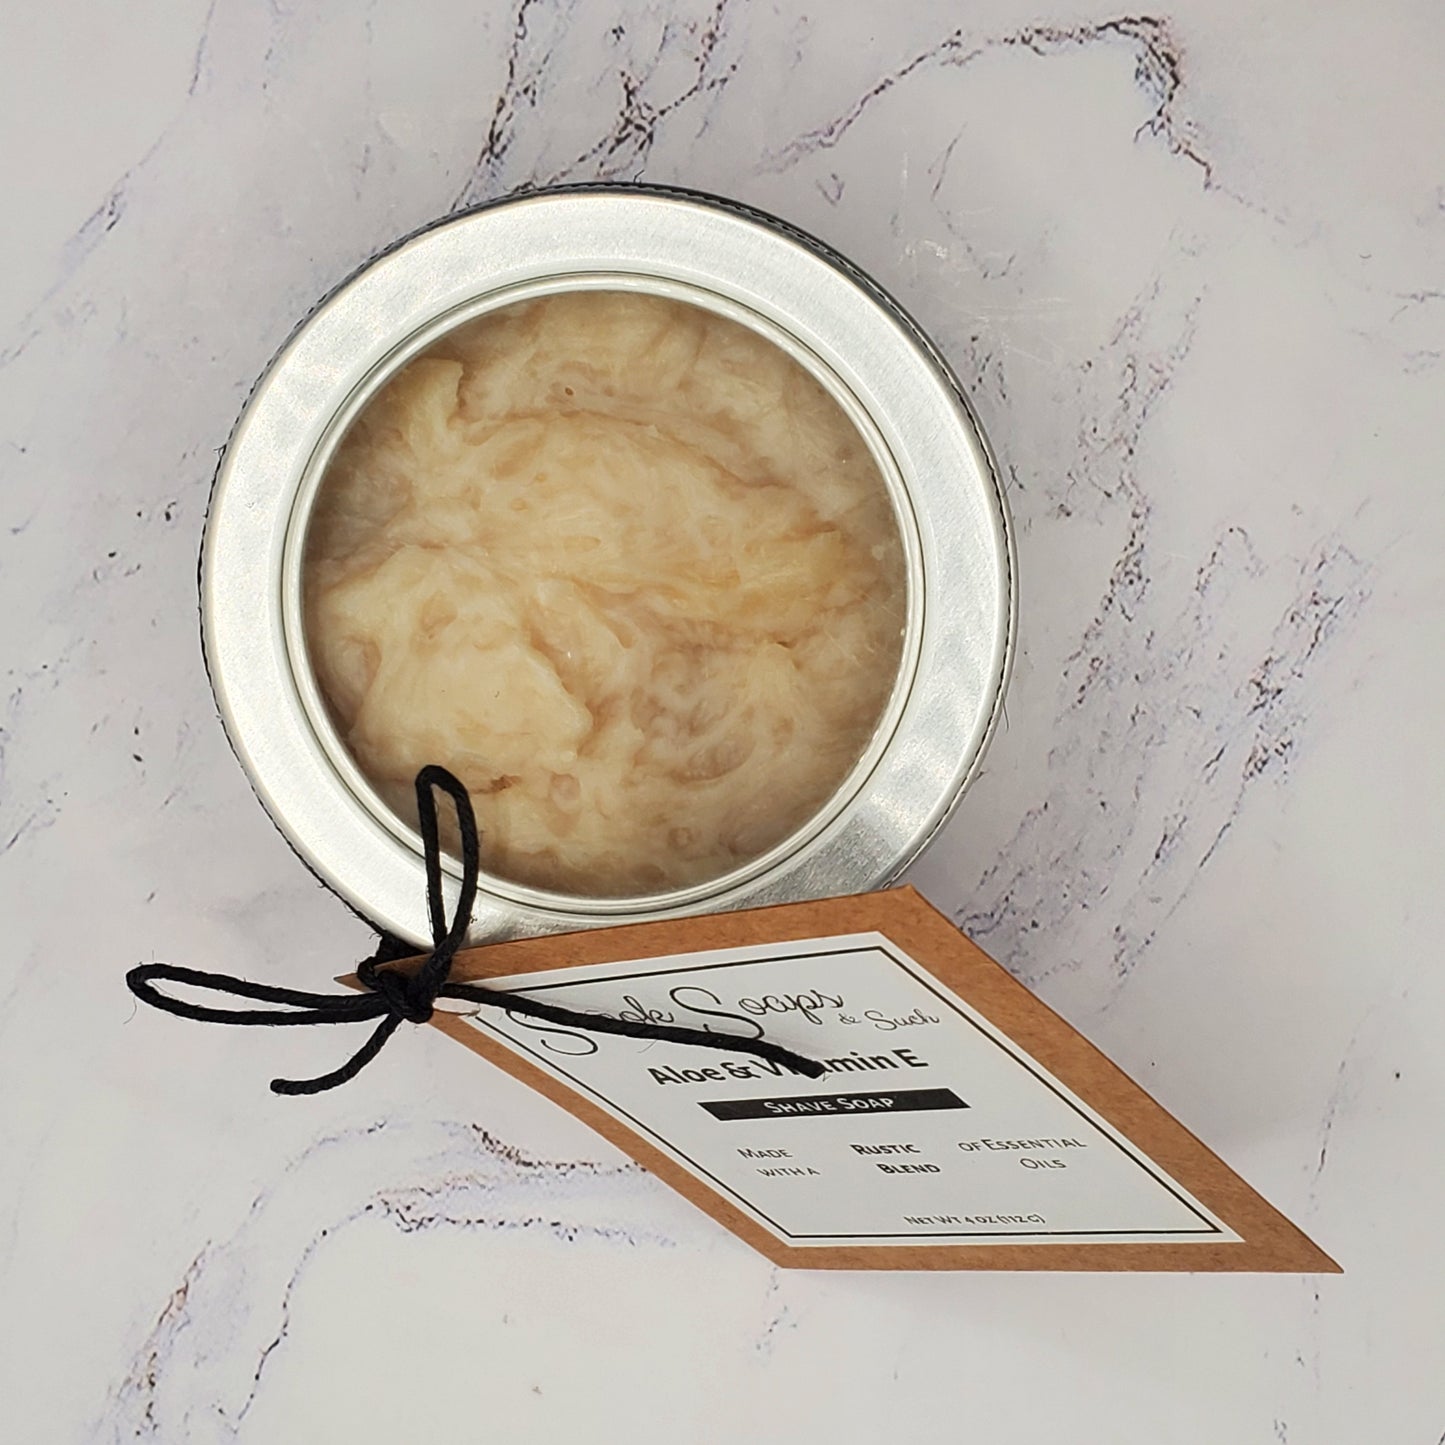 Shave Soap in Tin with Patchouli, Cedarwood, Clove, and Vetiver Essential Oils